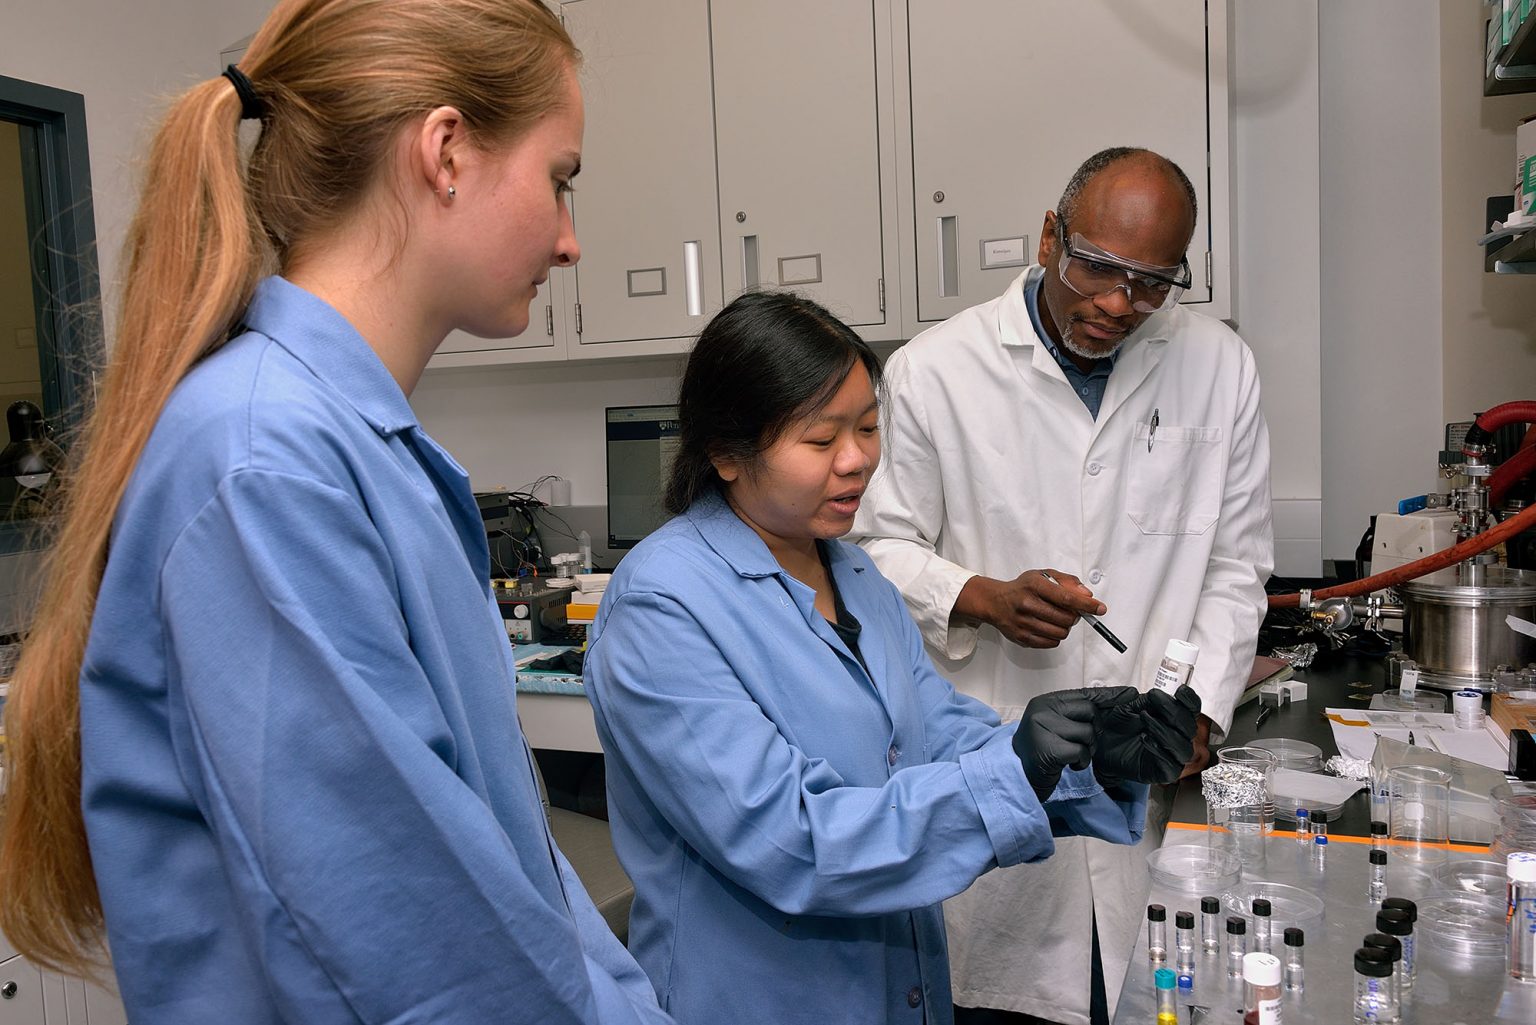 Image of REU students with Chinedum Osuji in the lab